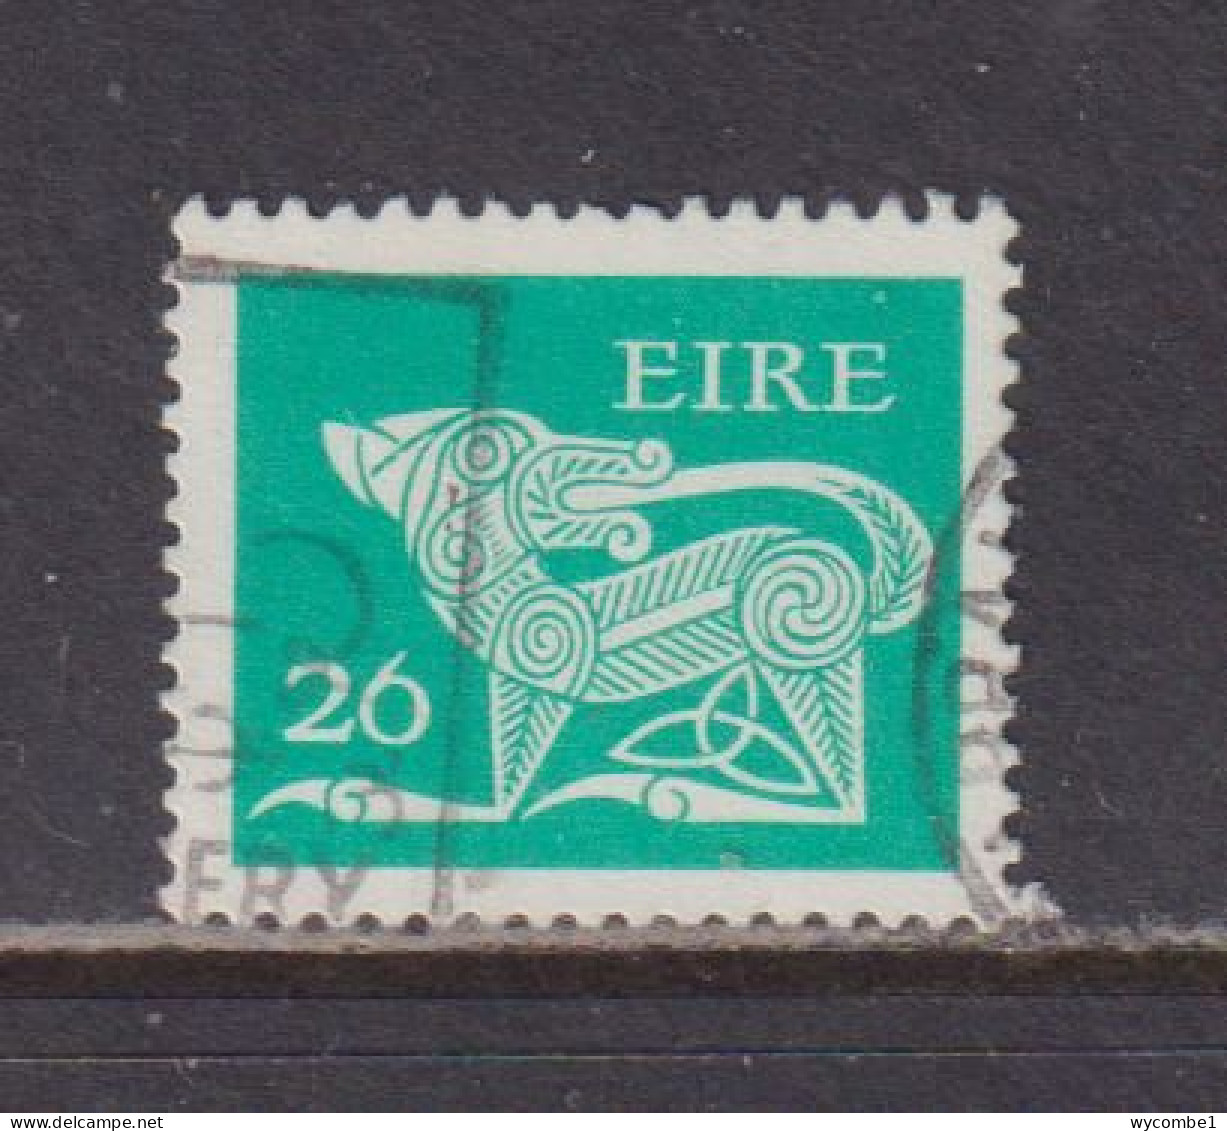 IRELAND - 1971  Decimal Currency Definitives  26p  Used As Scan - Usados